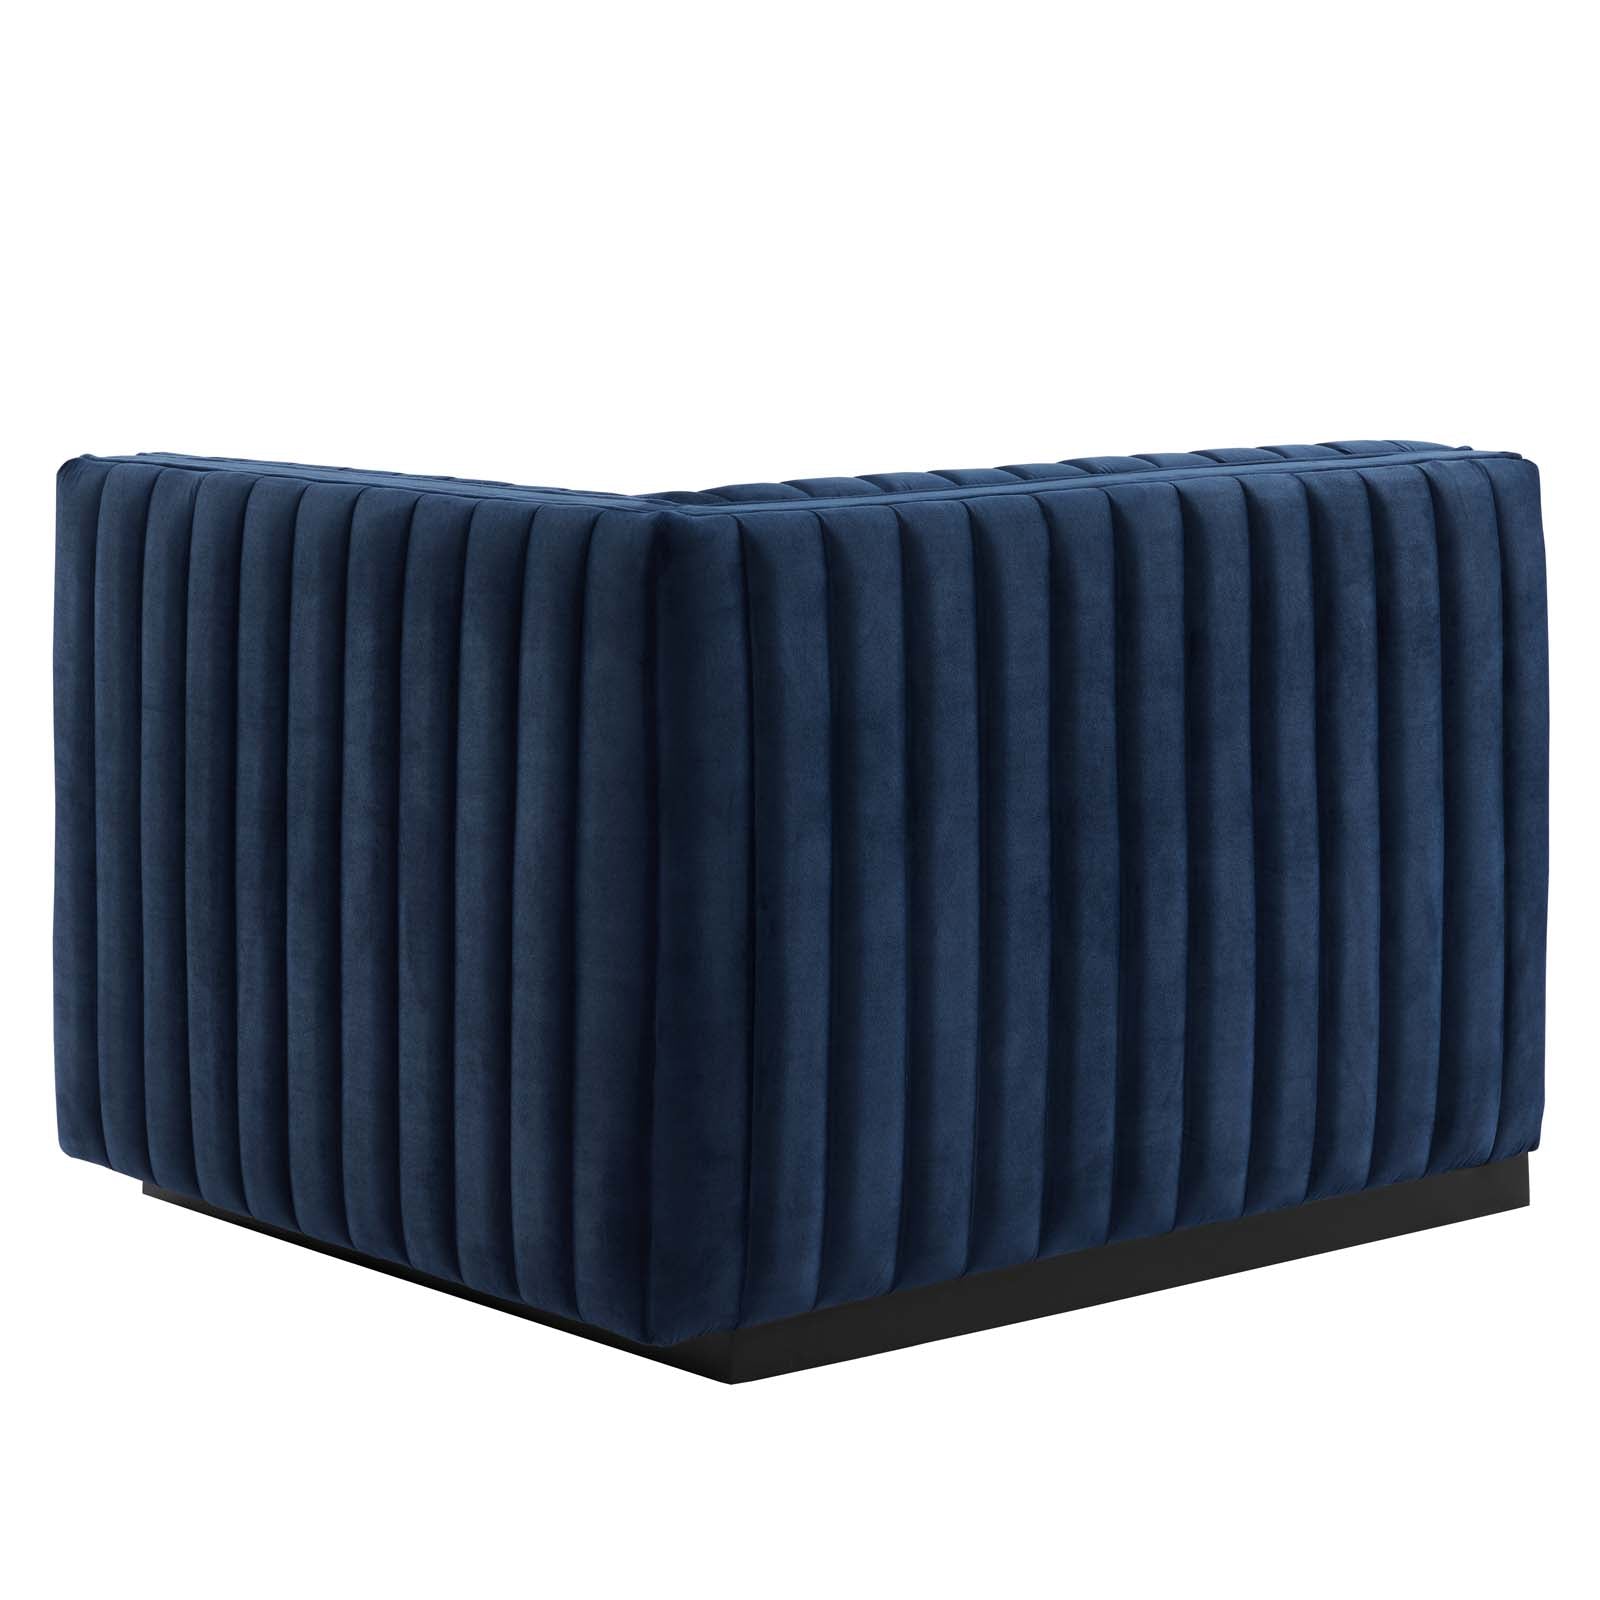 Modway Sectional Sofas - Conjure Channel Tufted Performance Velvet 6-Piece Sectional Black Midnight Blue